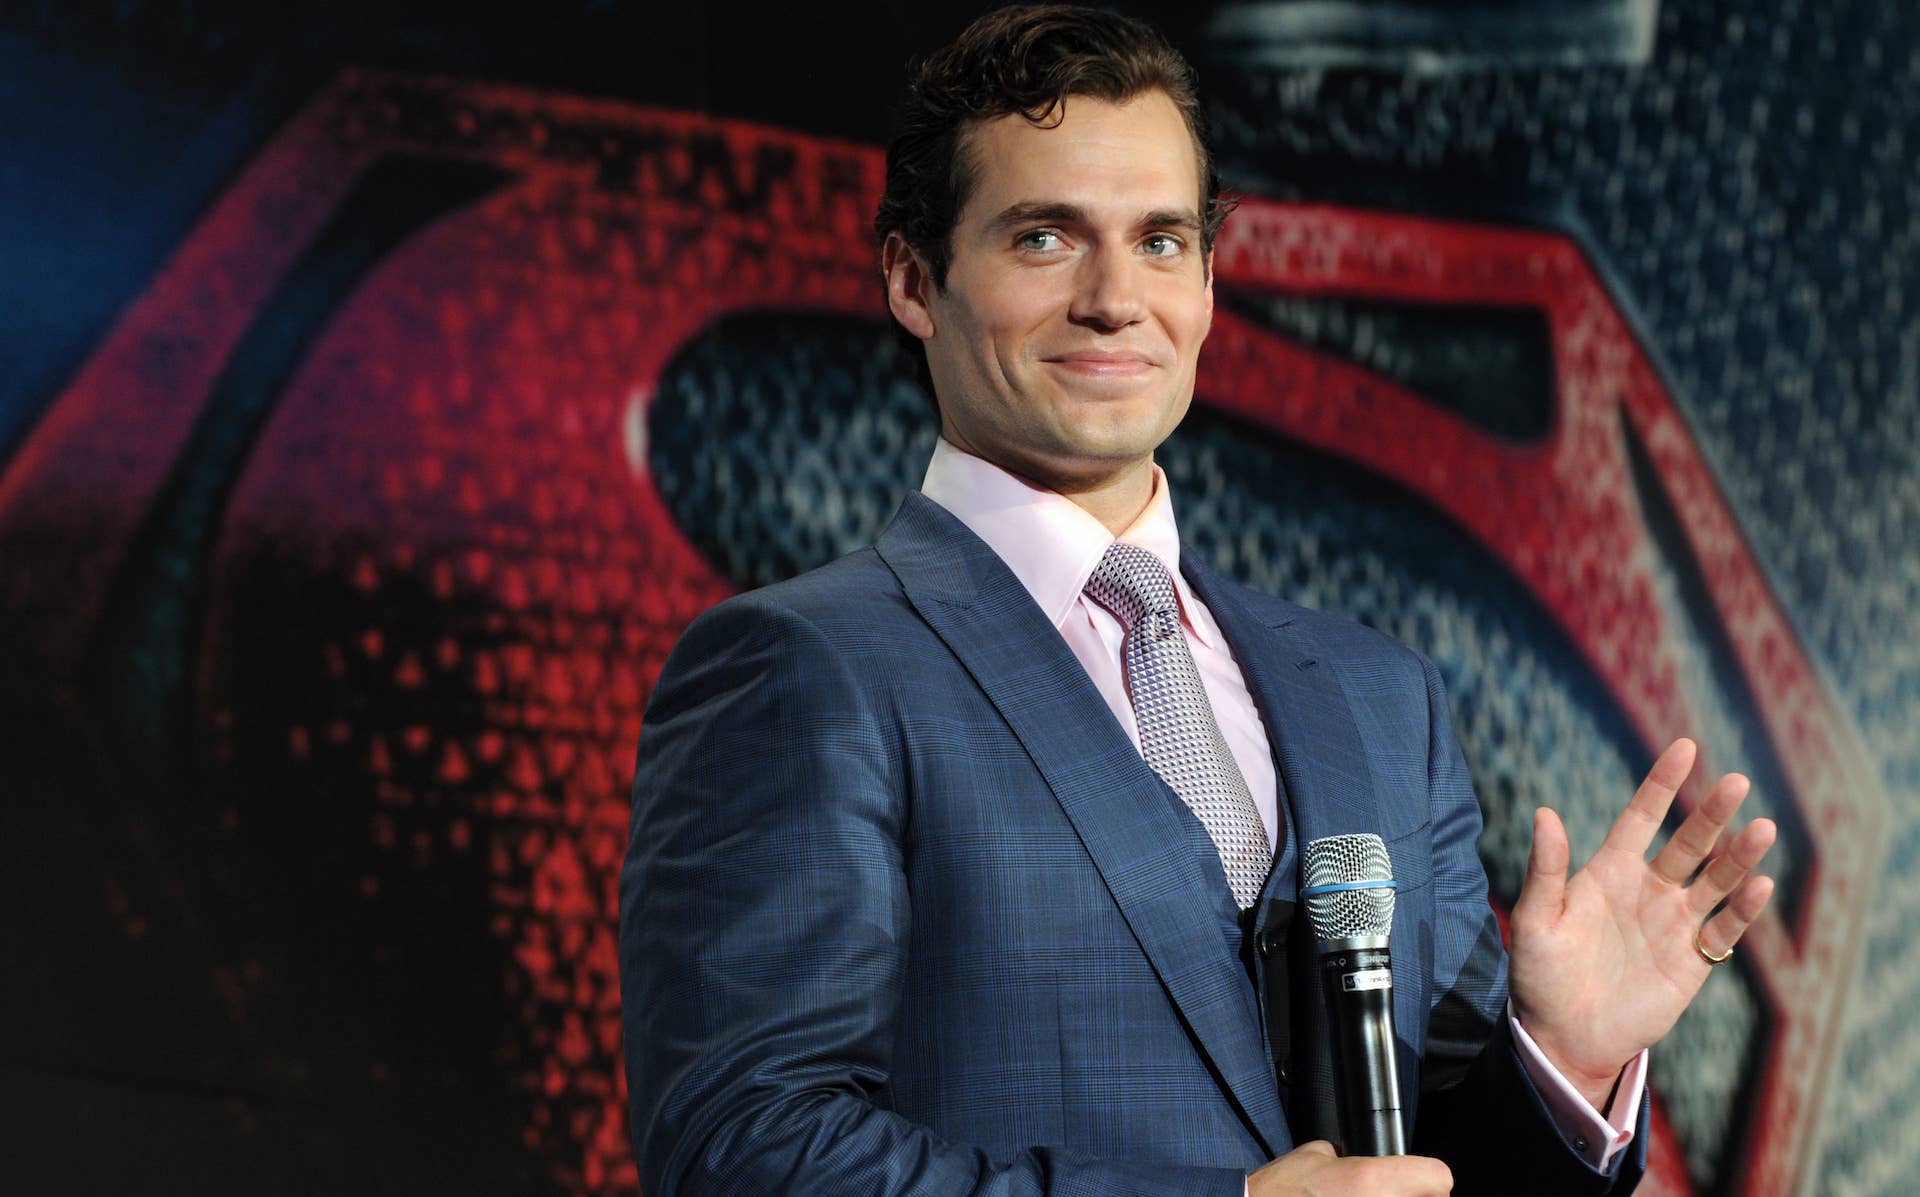 BATMAN V. SUPERMAN: First Look at Actor Henry Cavill On Set in His